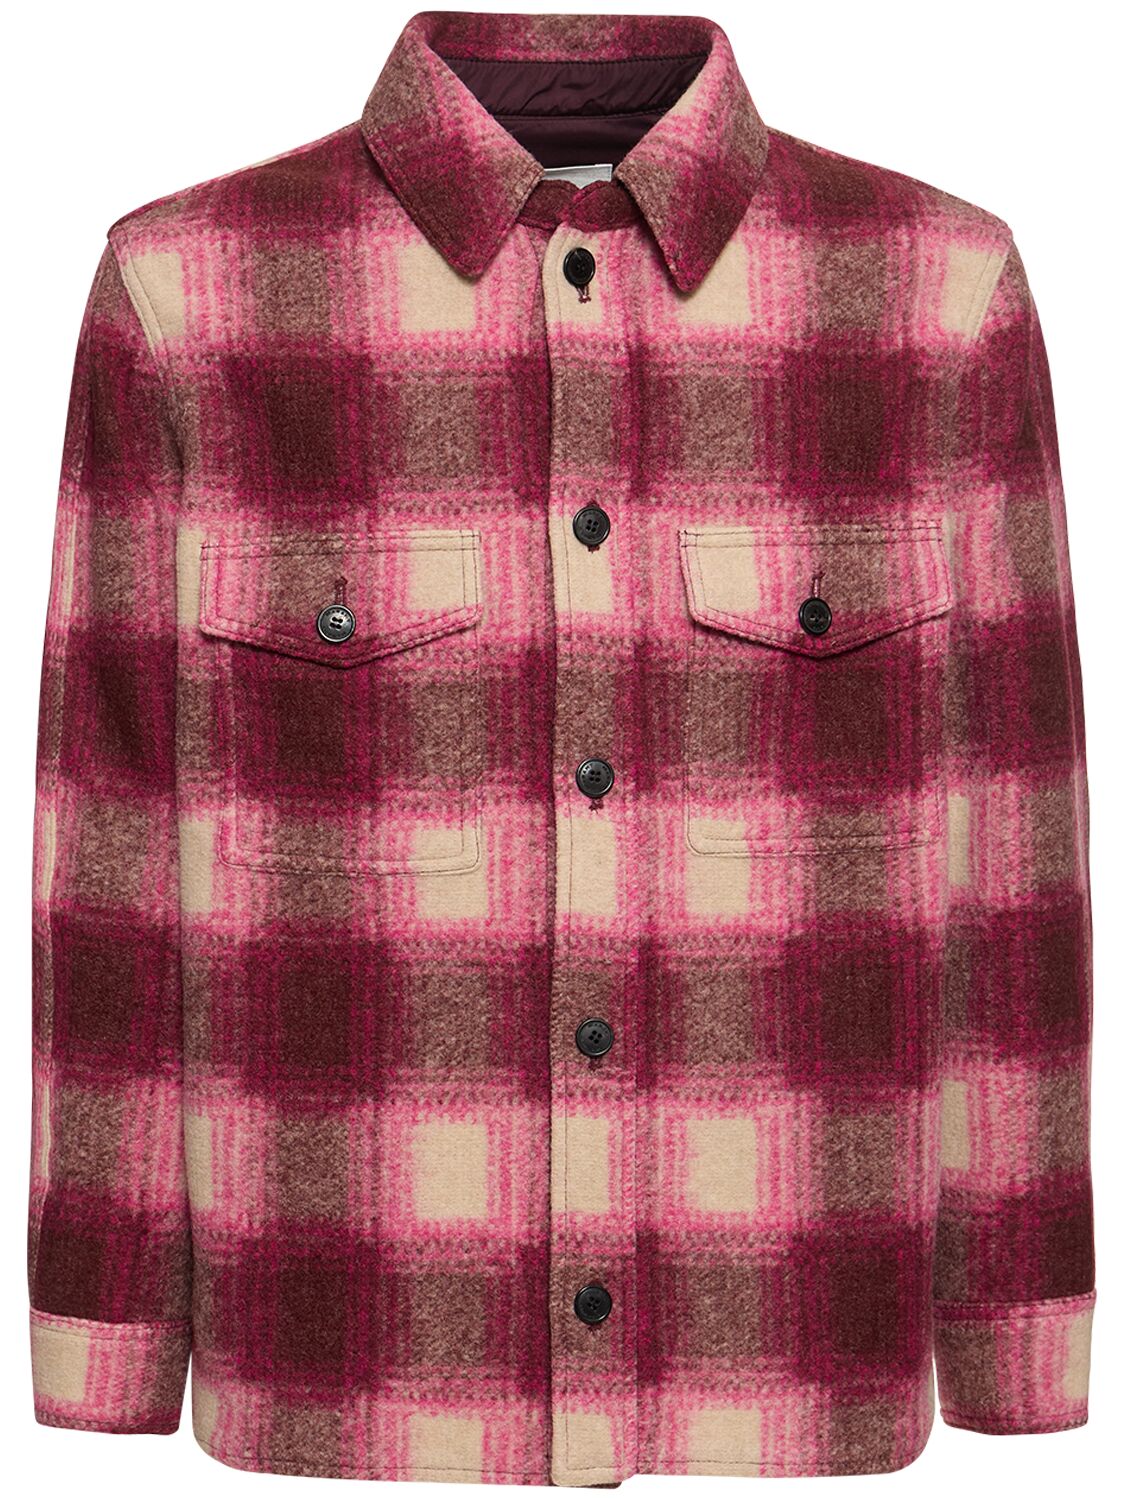 Checked Wool Blend Jacket – MEN > CLOTHING > JACKETS